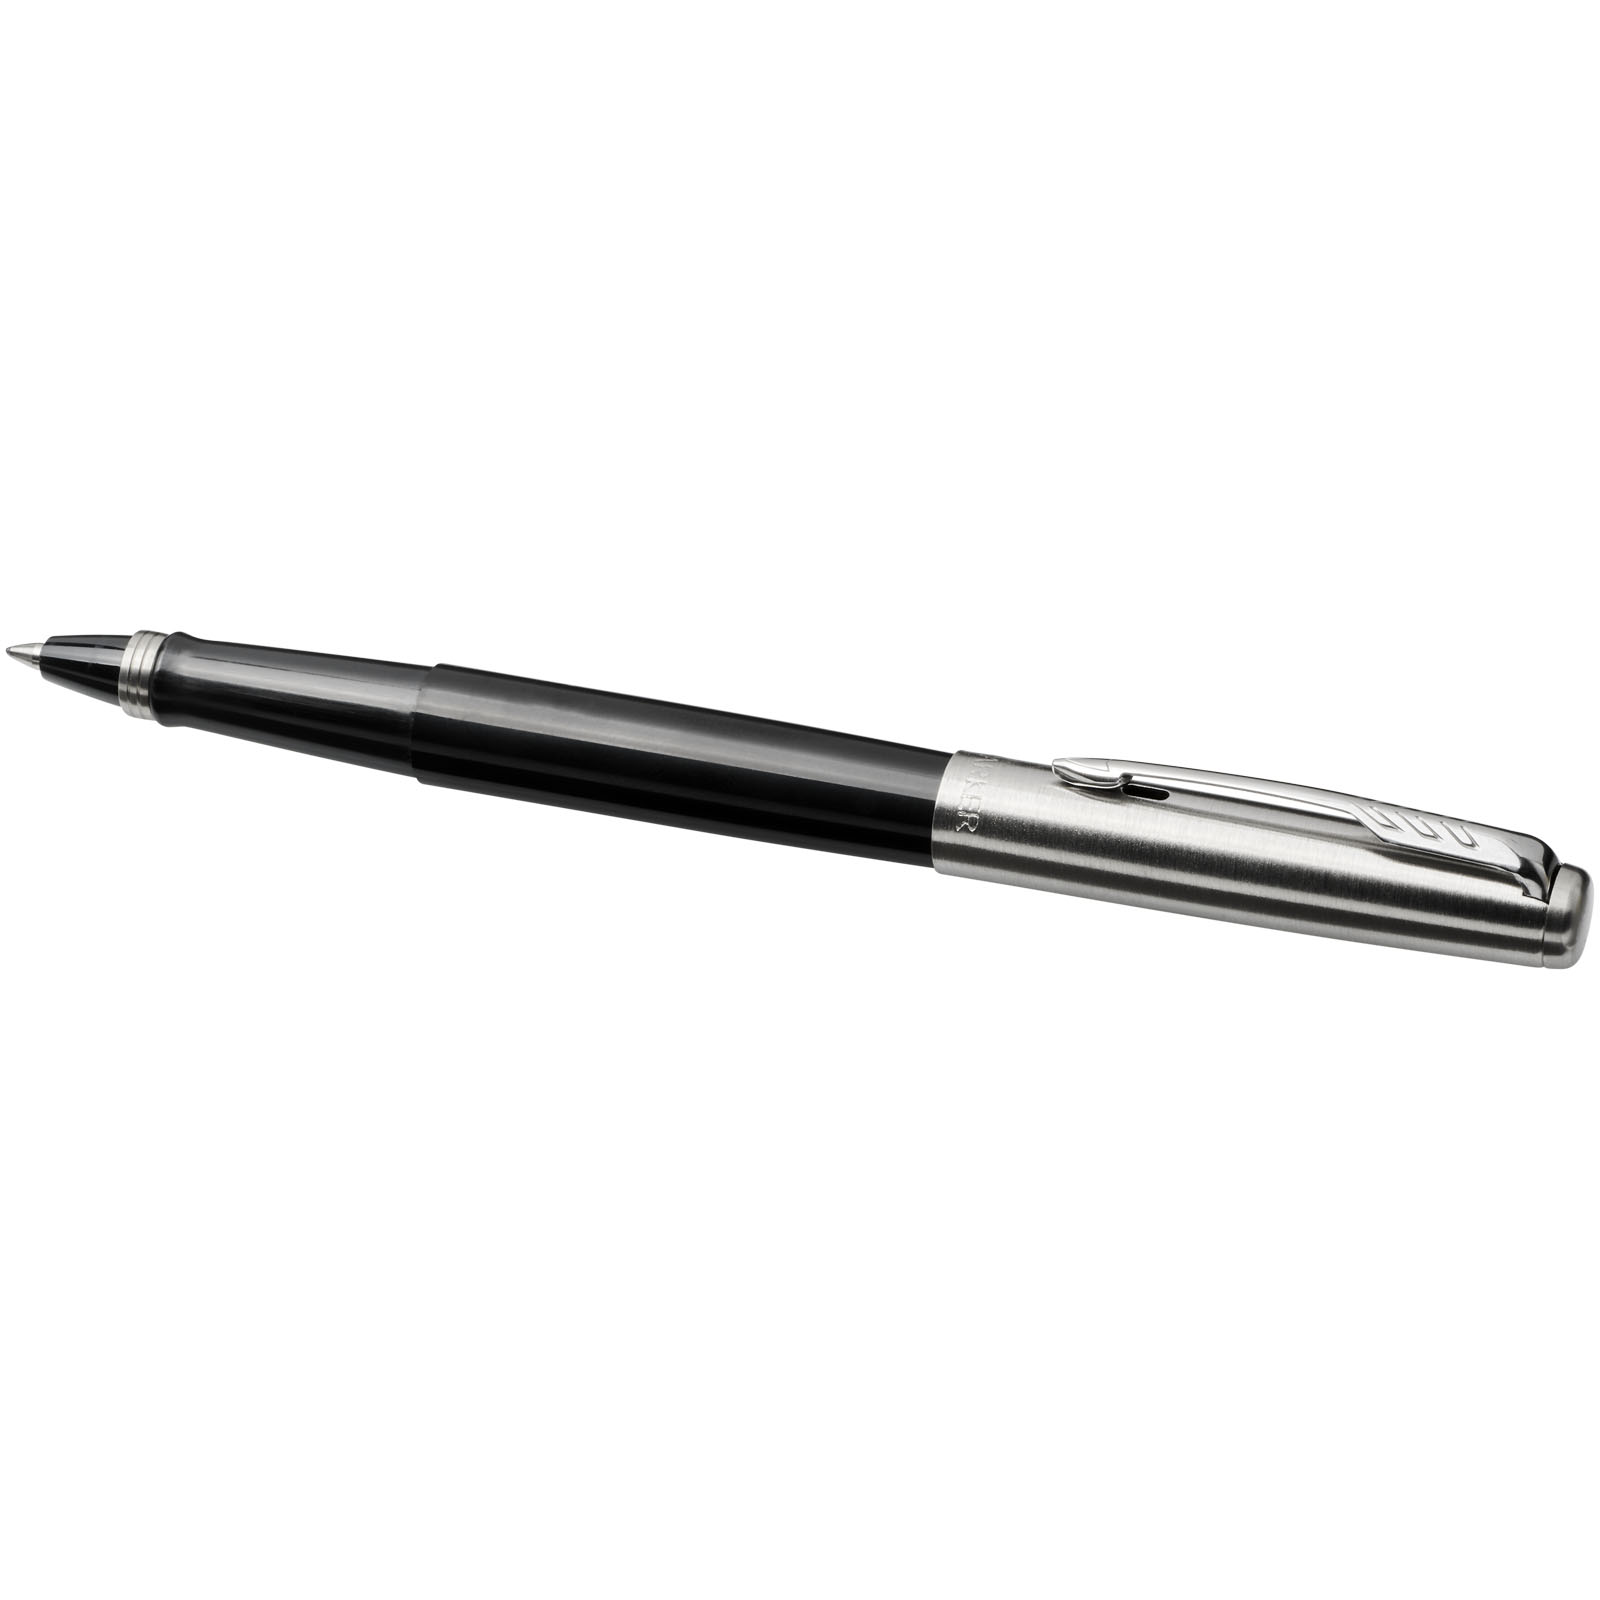 Advertising Rollerball Pens - Parker Jotter plastic with stainless steel rollerball pen - 4